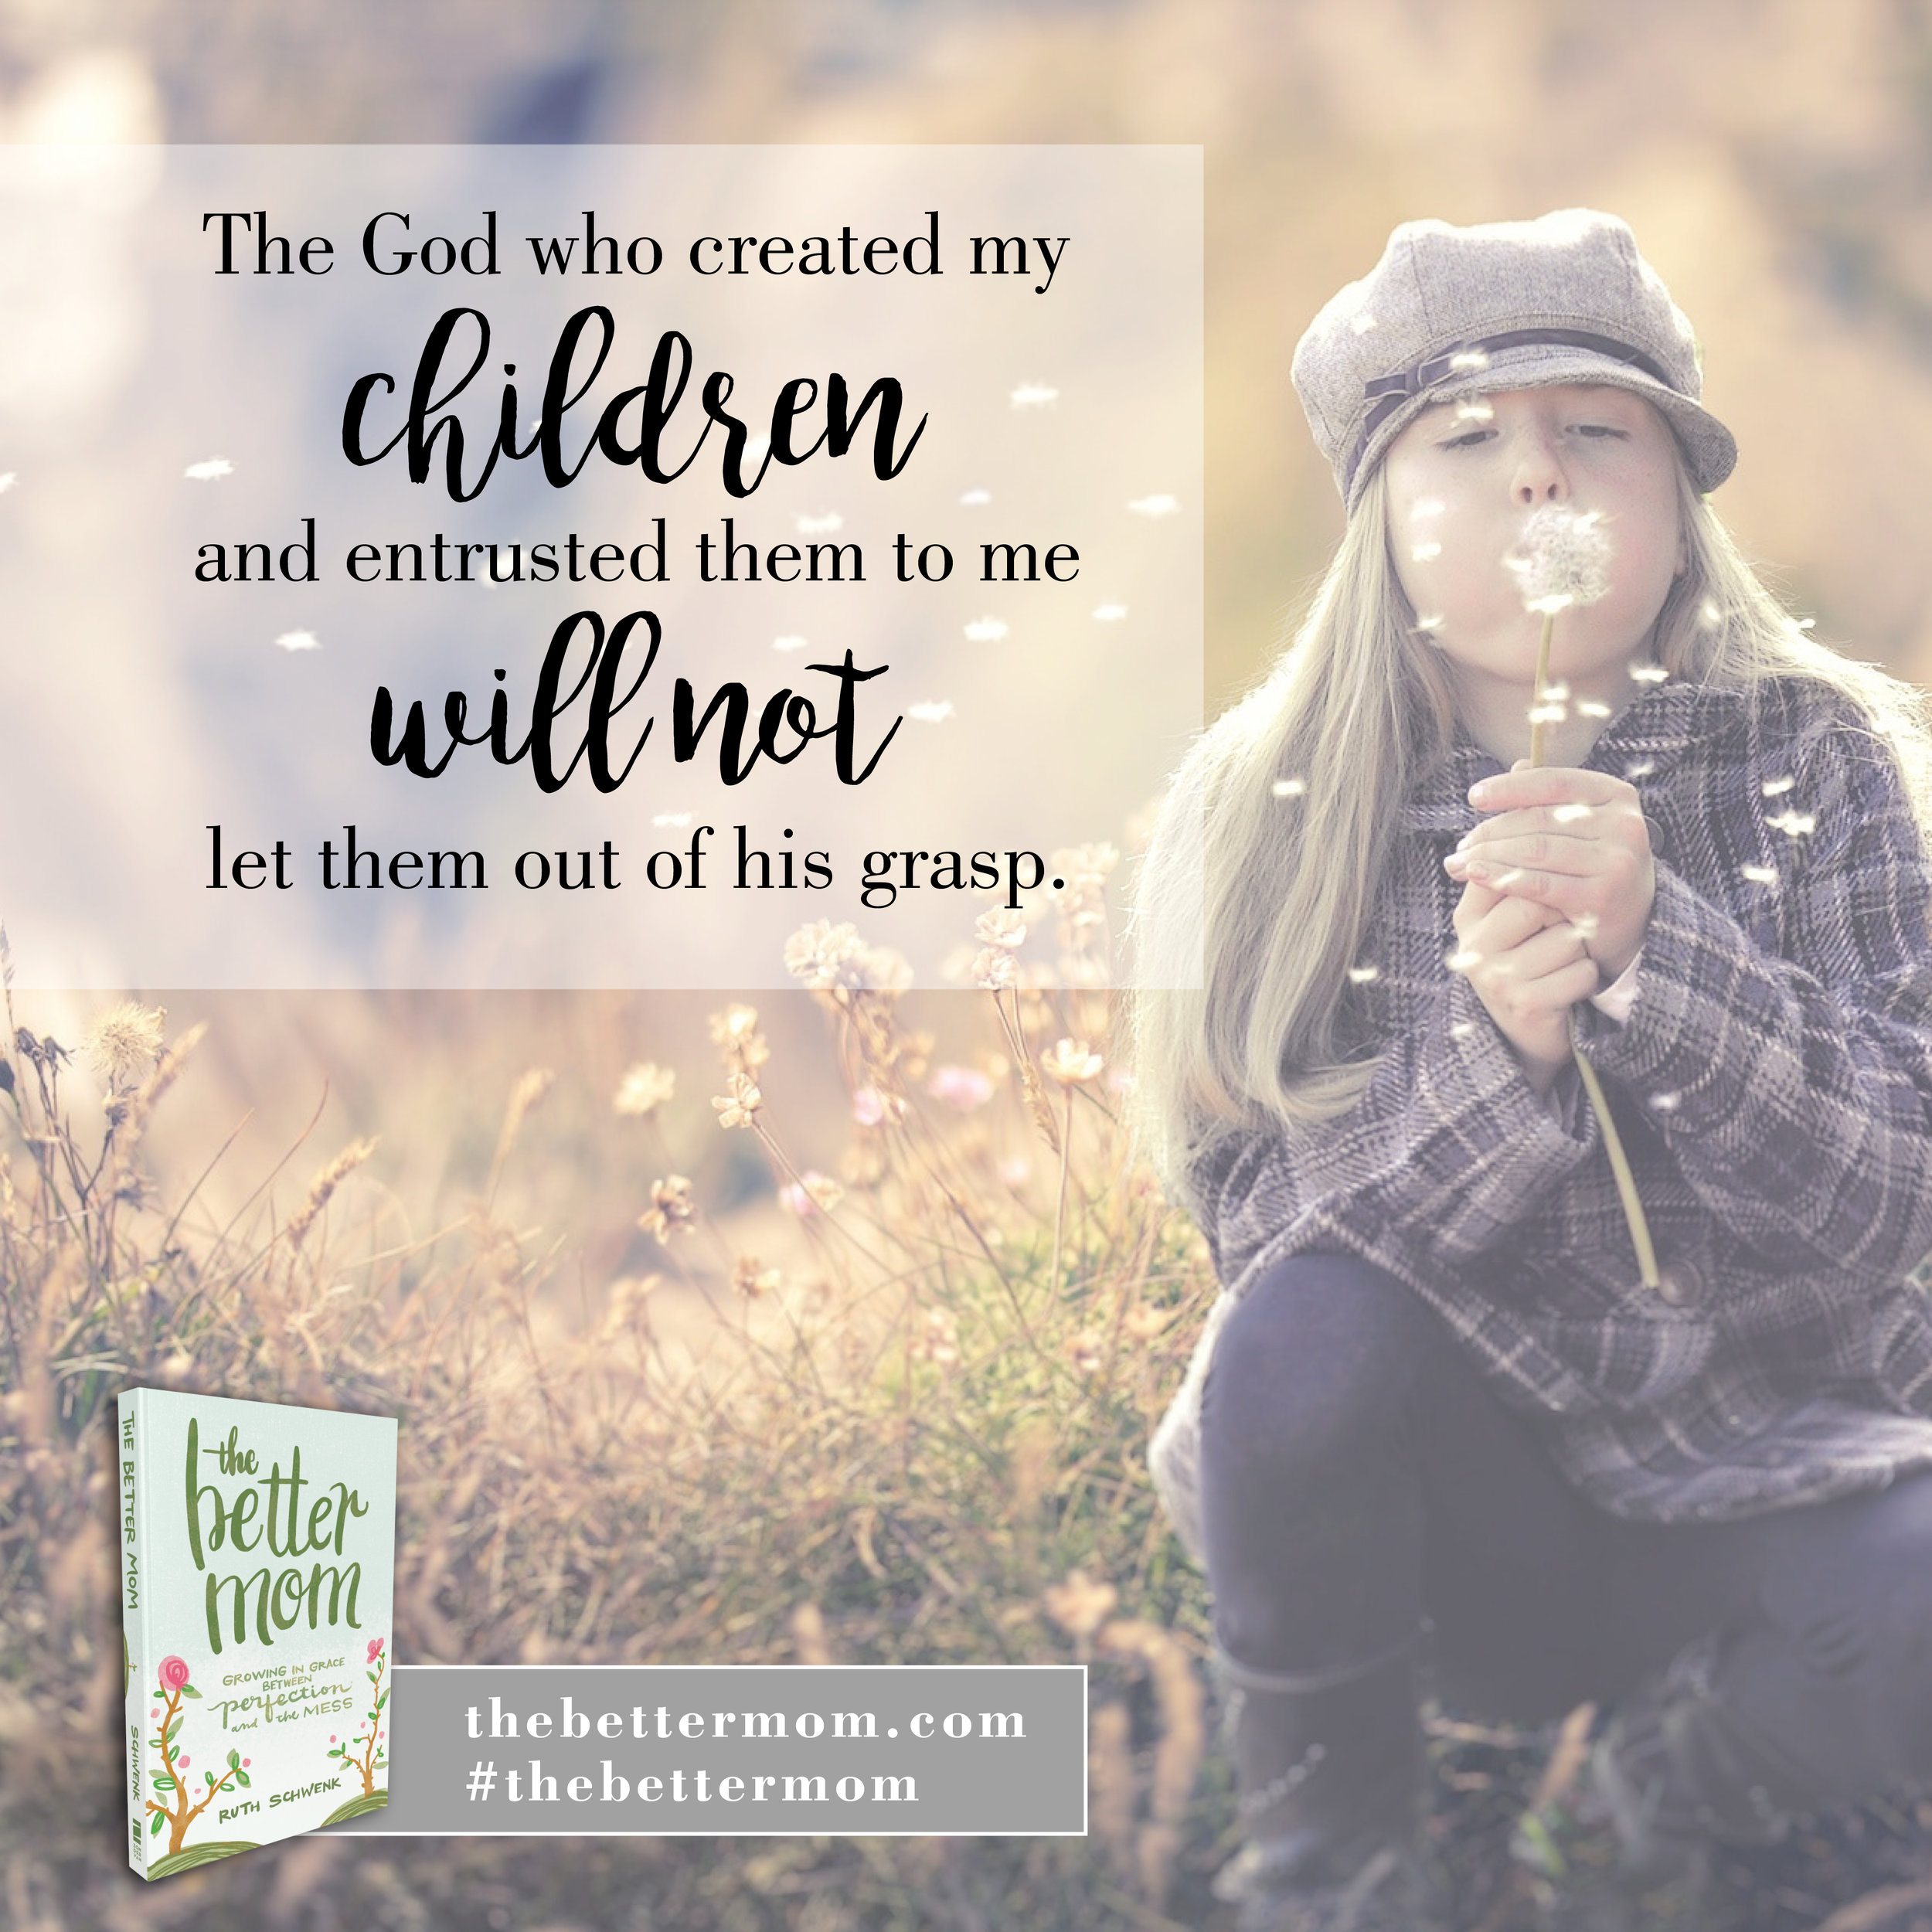     Do you fear for the future of your children?Wondering if somewhere along the way you messed up?&nbsp;The safest place on earth for our children (and us moms) is in God's hands. He created our children and entrusted them to us and will not let the